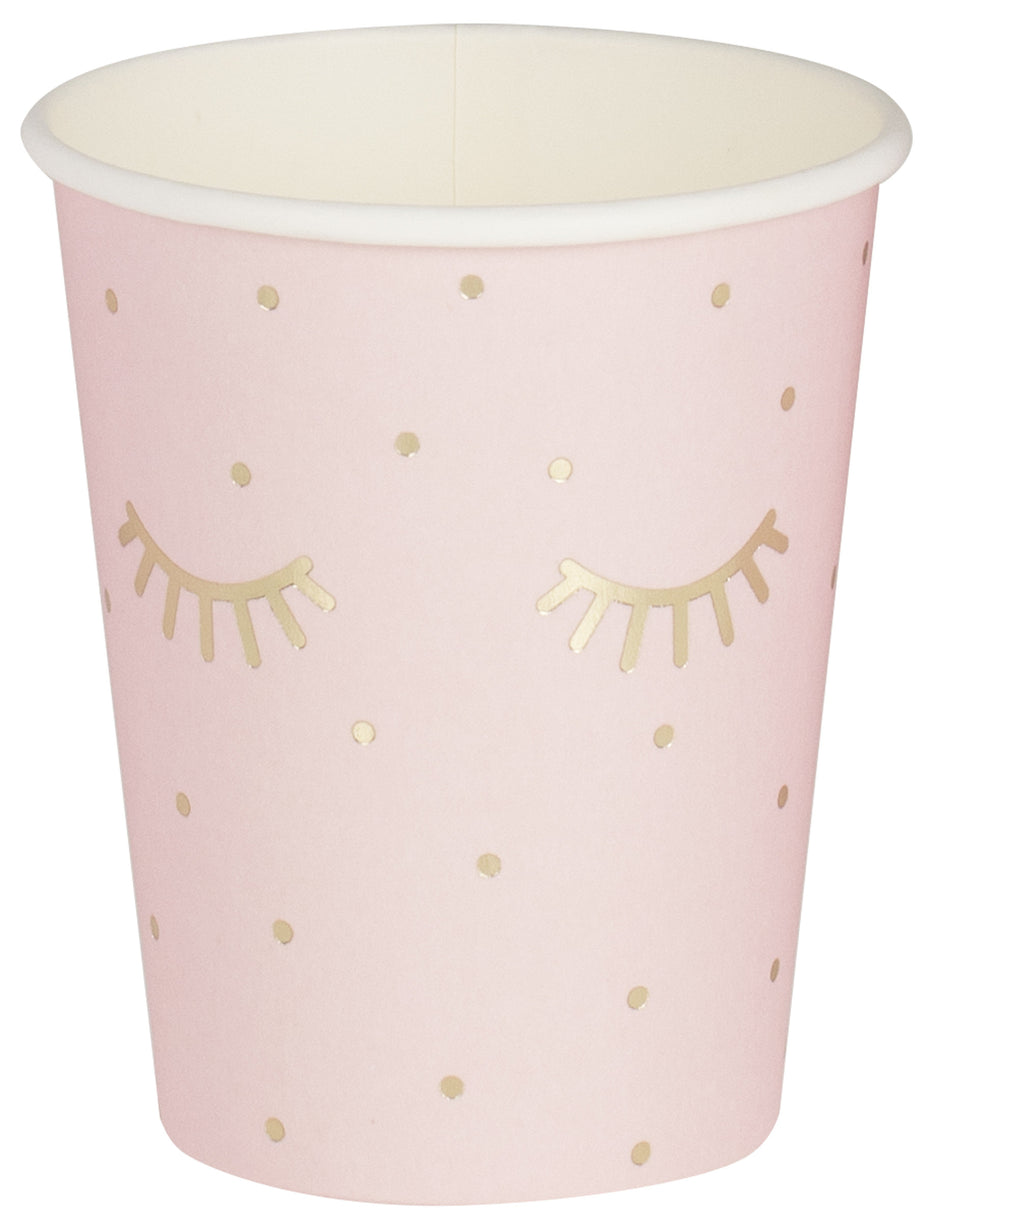 Gold Foiled and Pink Sleepy Eyes Paper Cups 